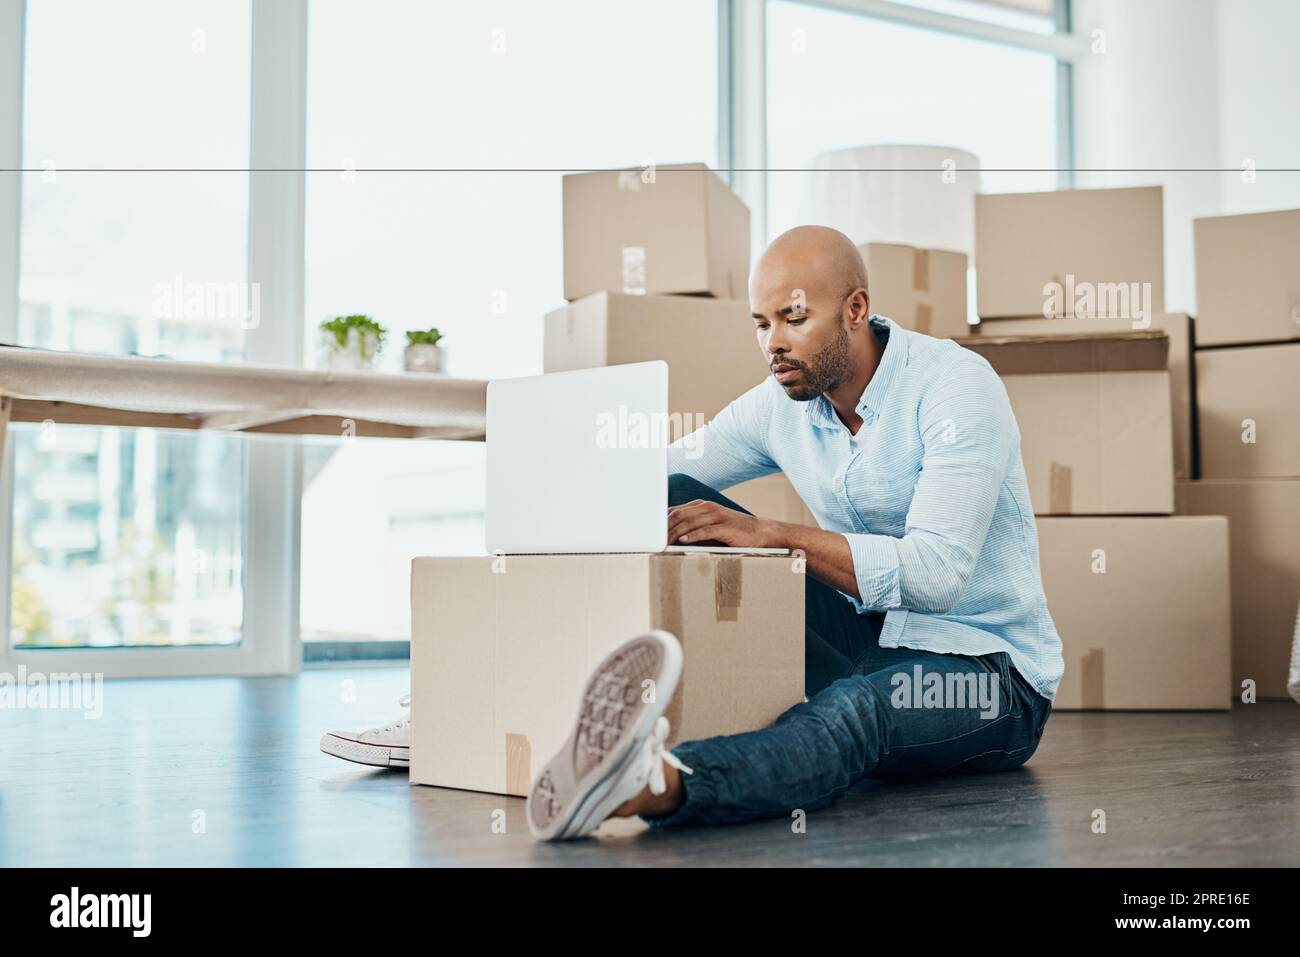 Browsing for ideas to upgrade his living space. a young man using a laptop while moving house. Stock Photo